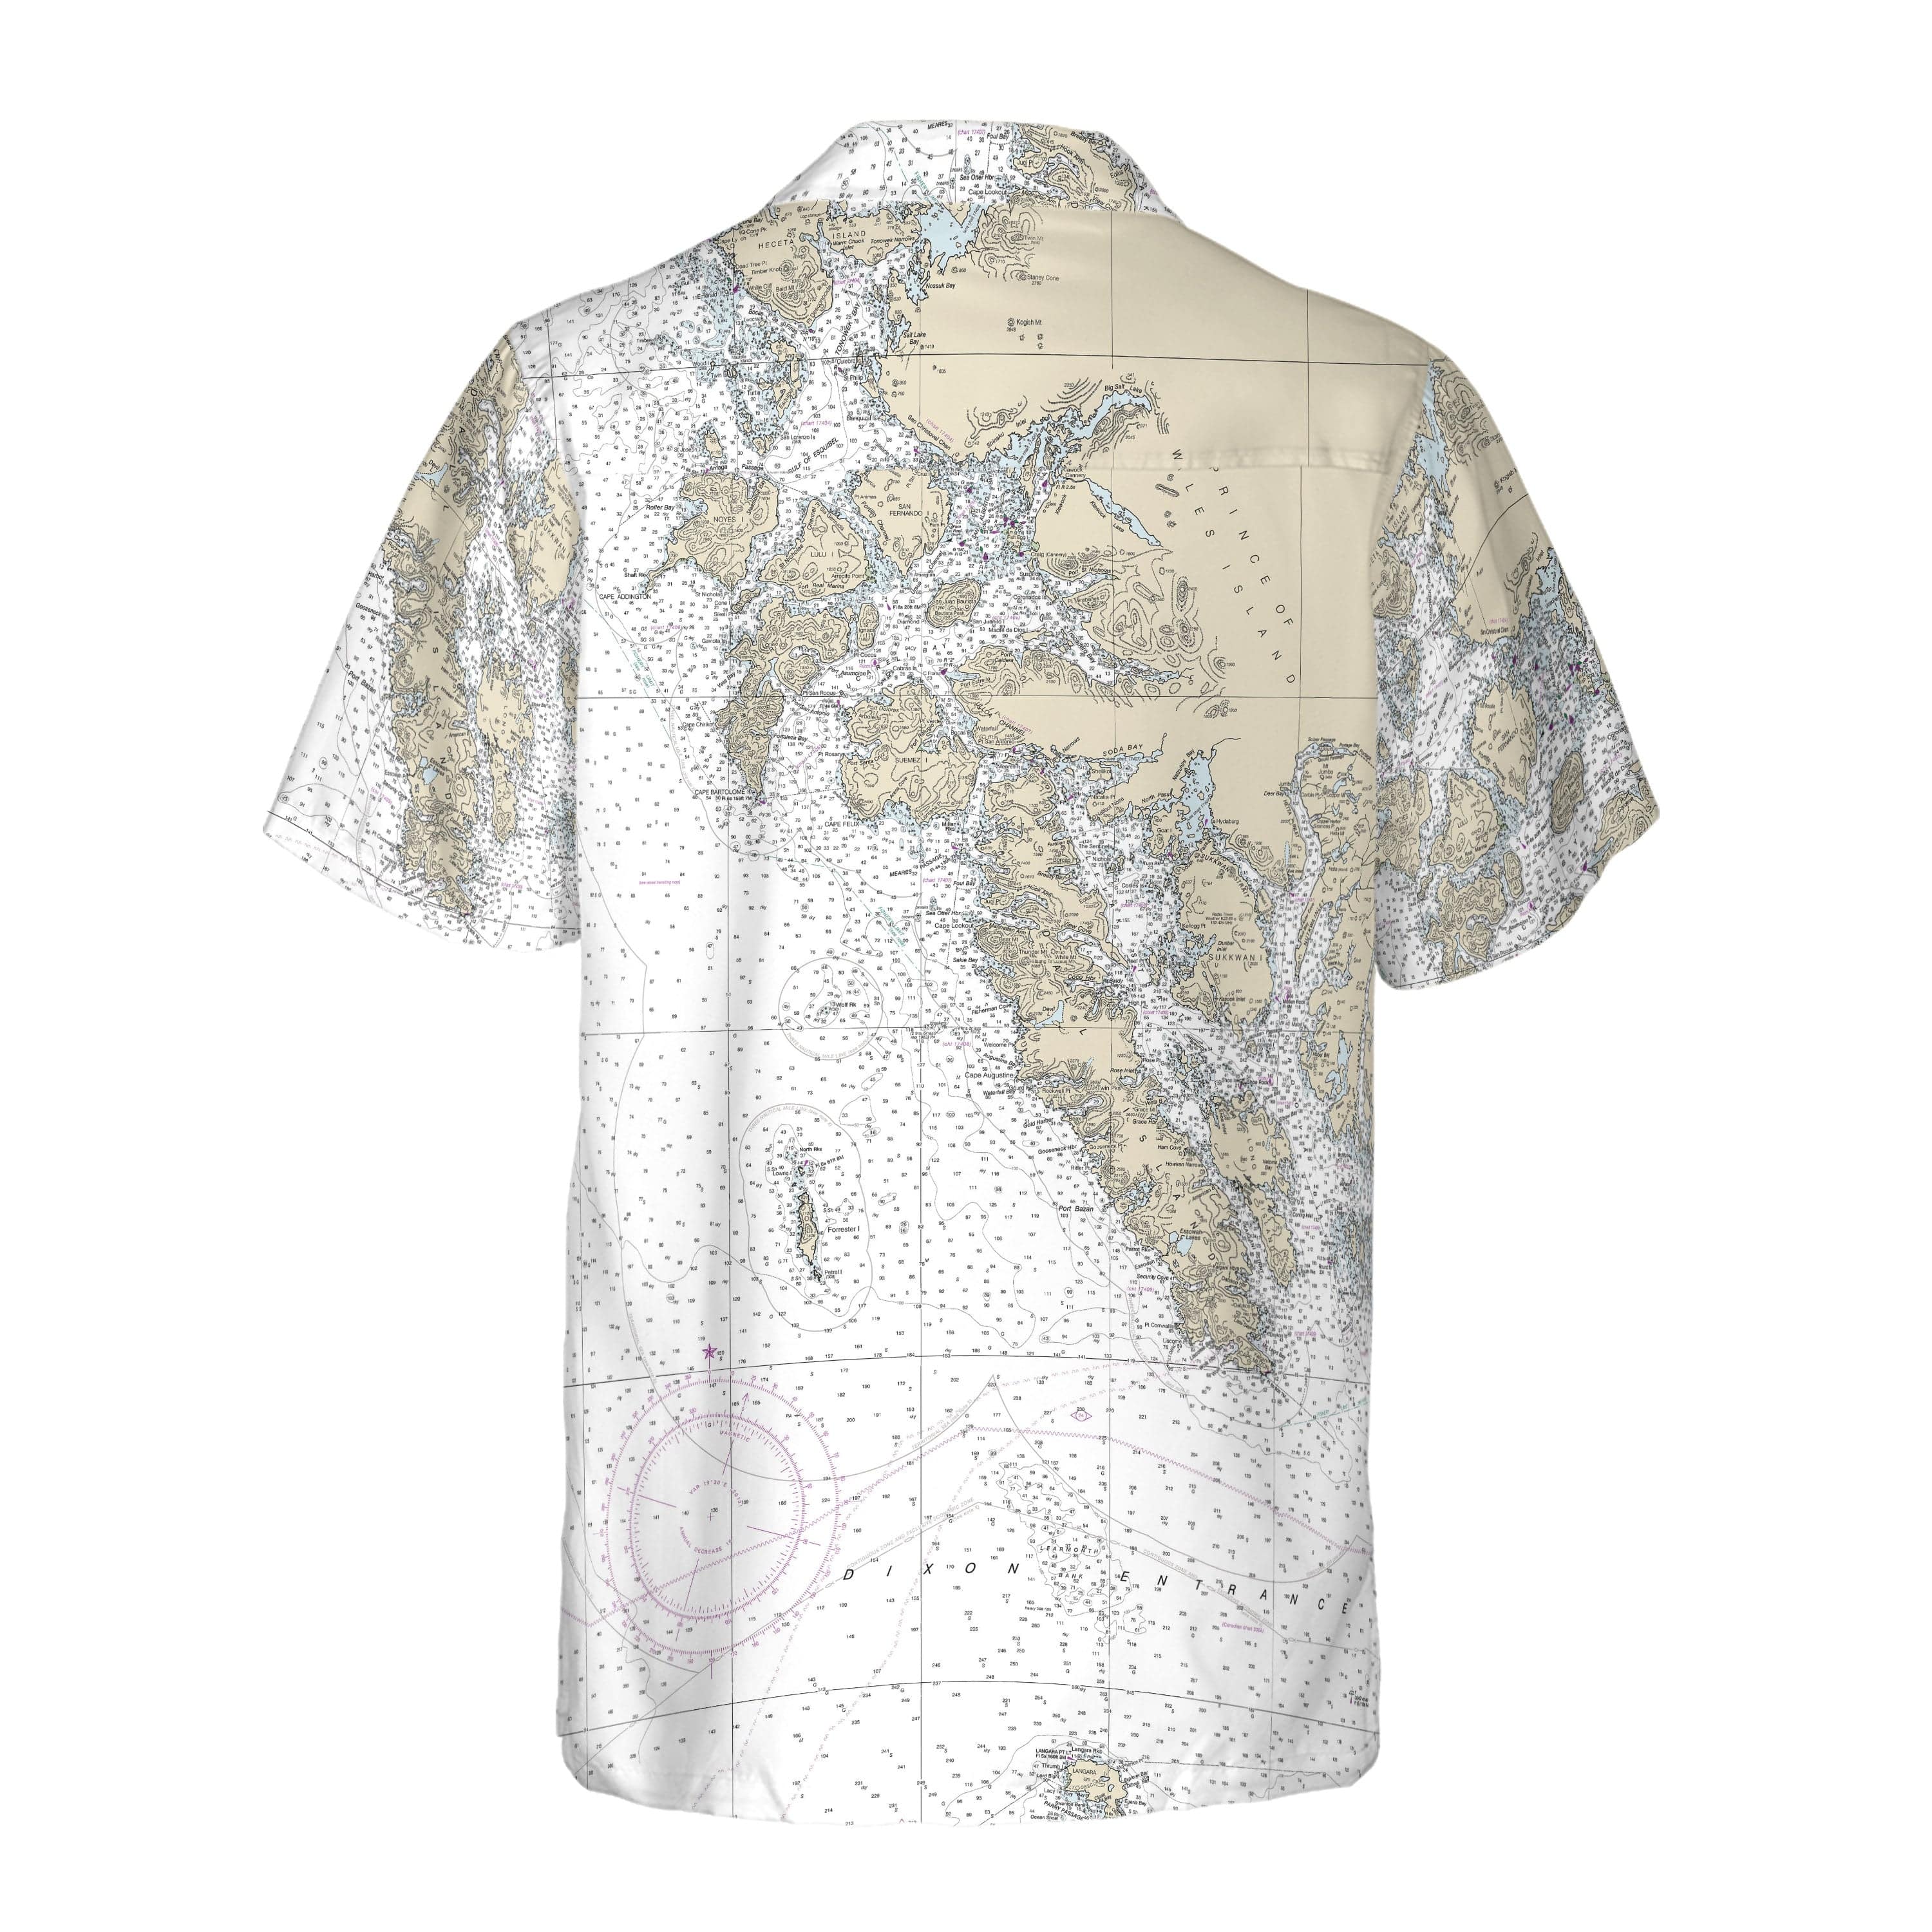 The Gulf of Esquibel to Dixon Entrance Coconut Button Camp Shirt